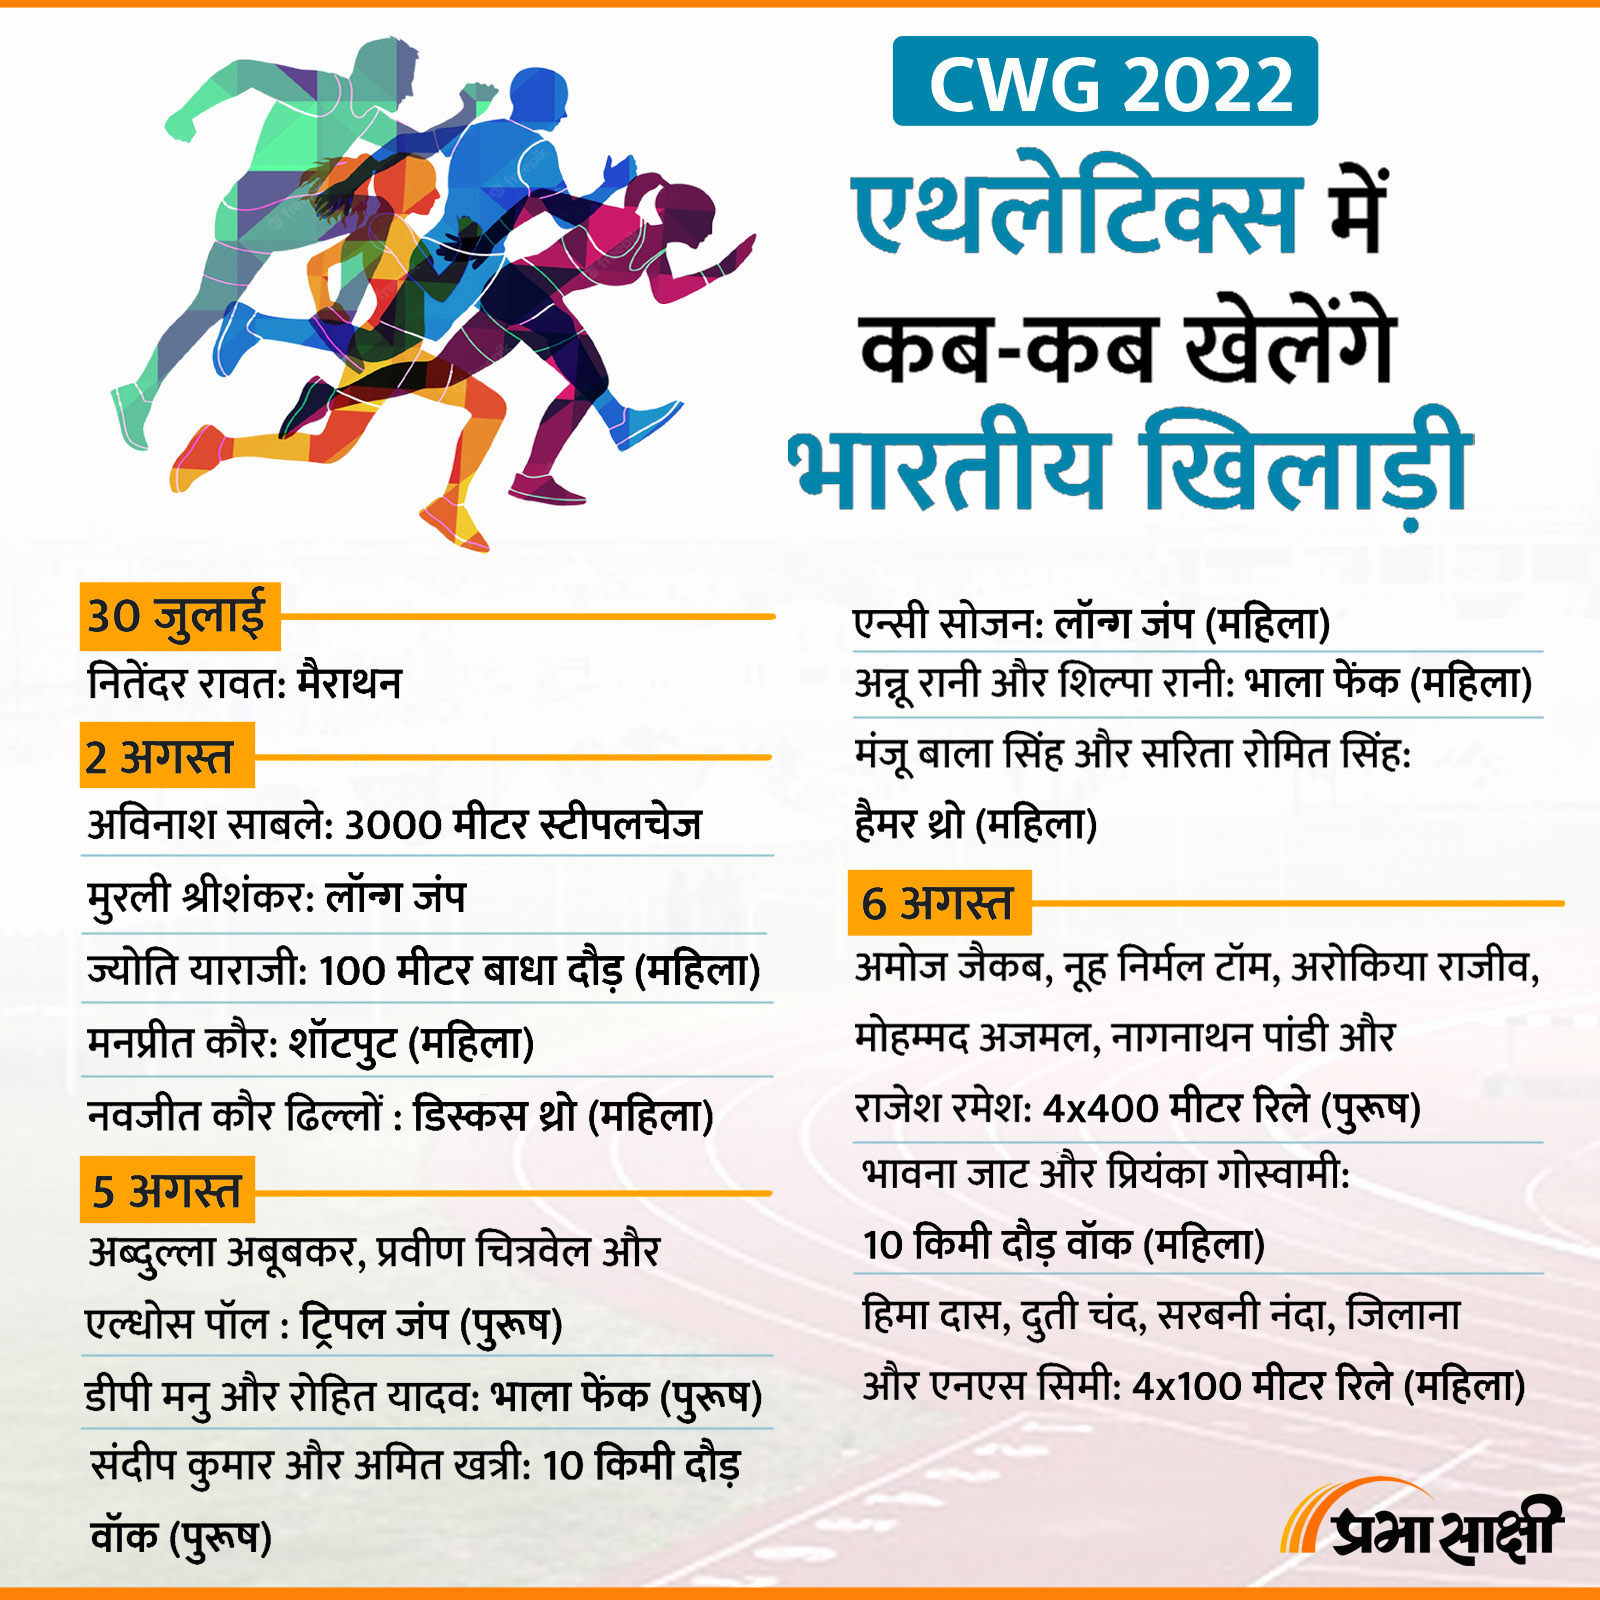 Indian Players in CWG 2022